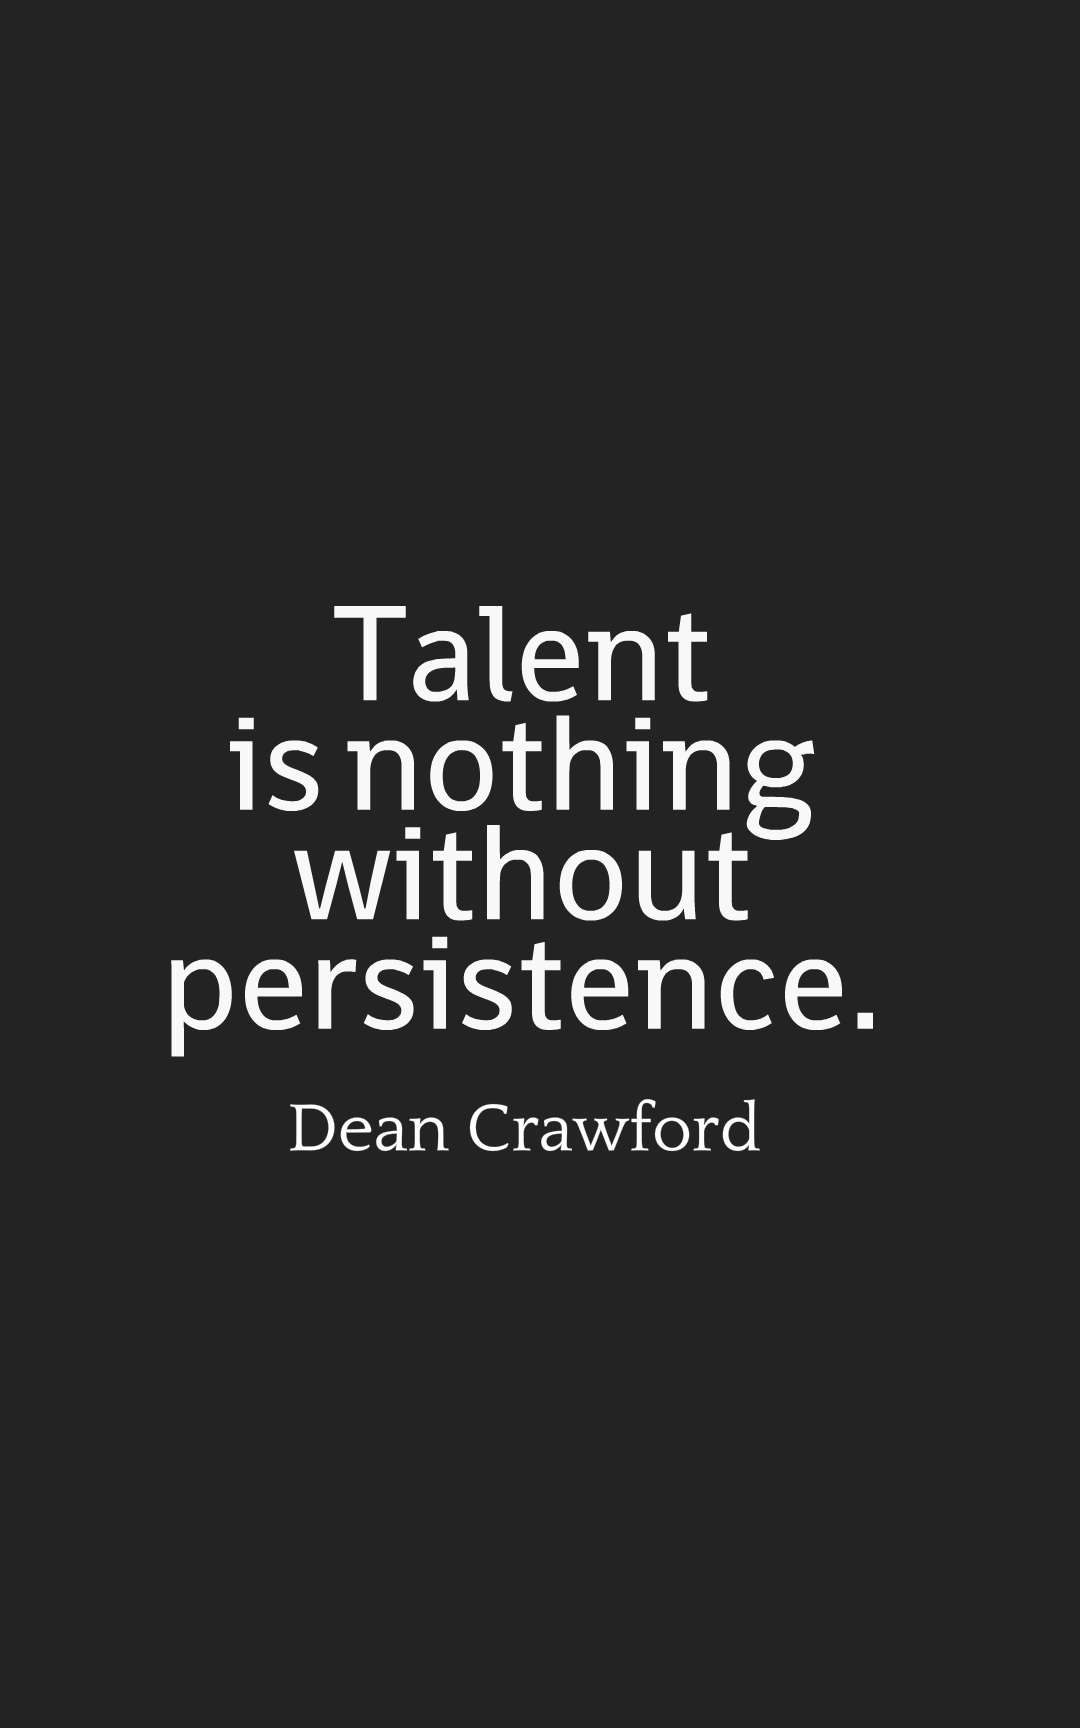 Talent is nothing without persistence.